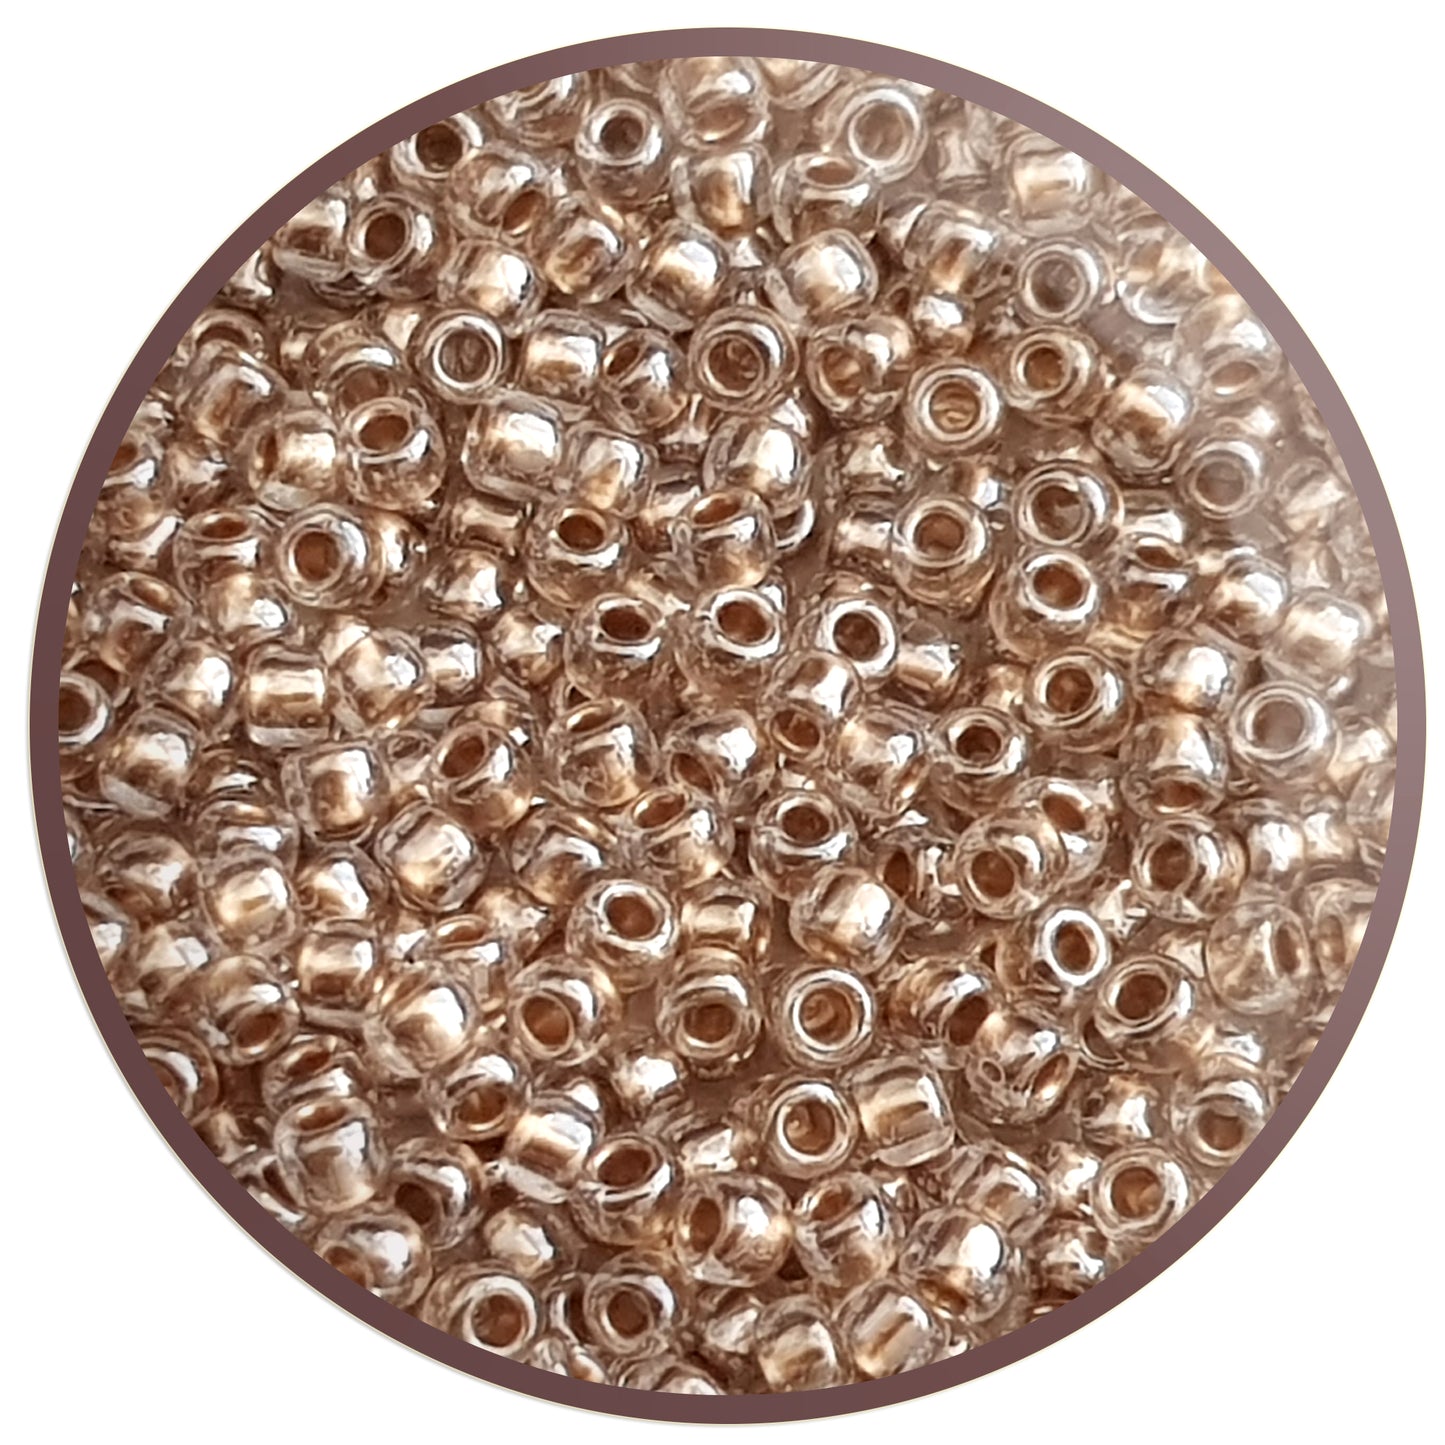 6/0 TR-989 Crystal Gold Lined 10g/30g Round Toho Seed Beads - Beading Supply